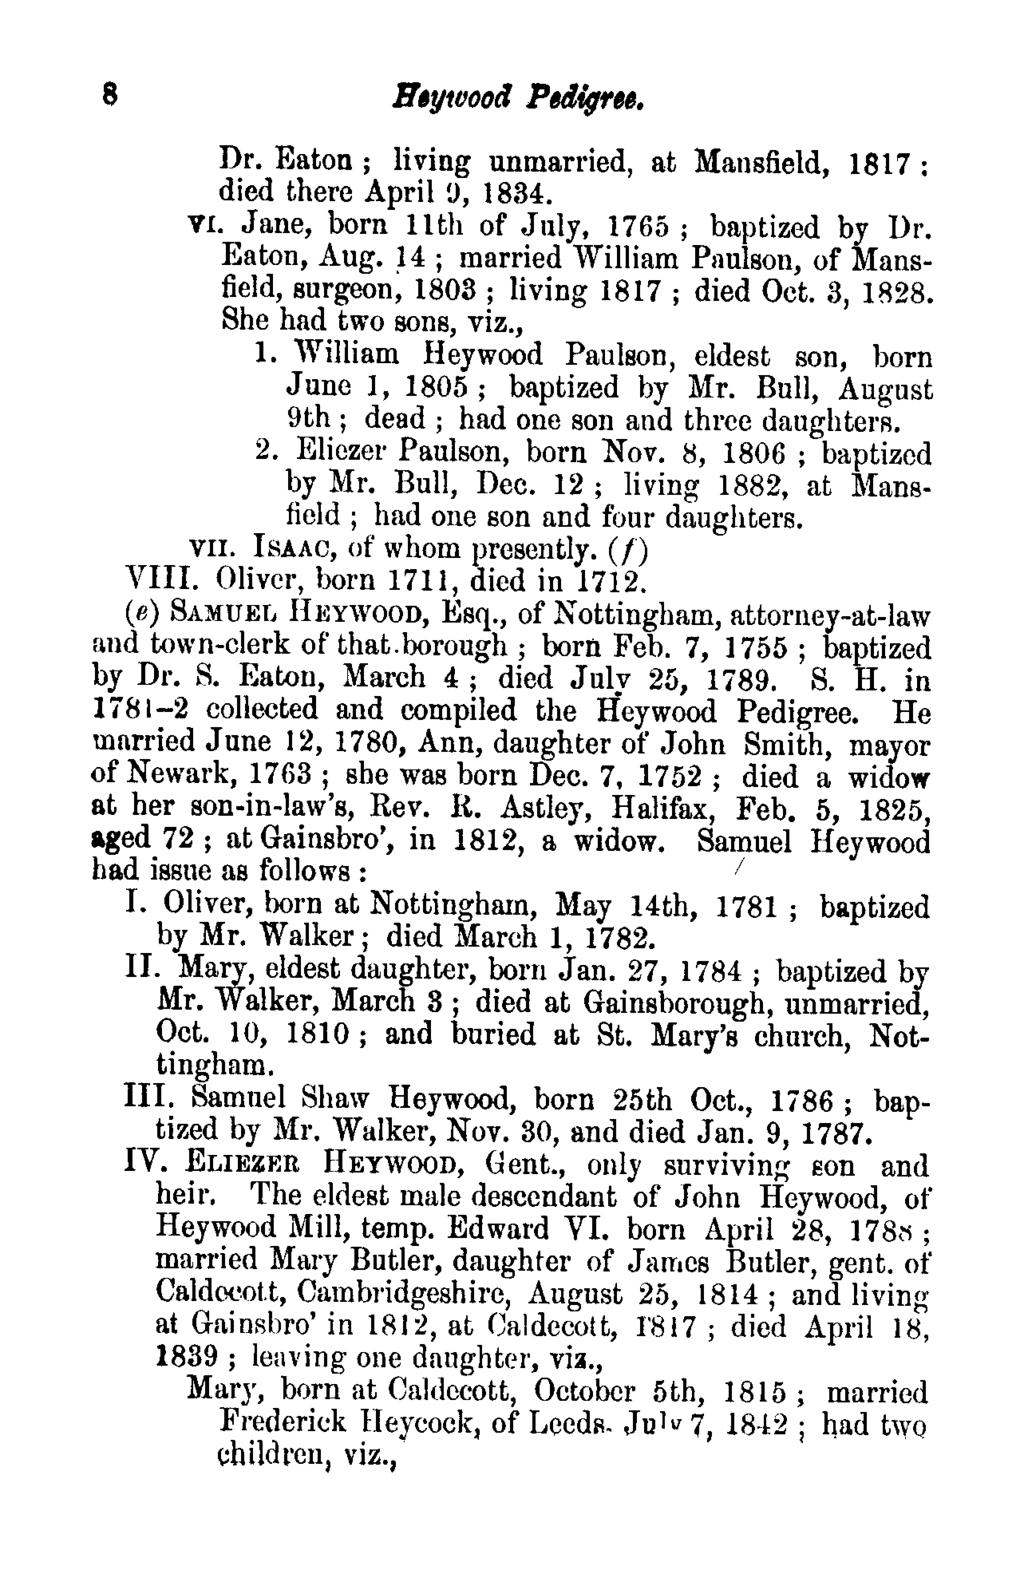 8 Heywood Pedigree. Dr. Eaton ; living unmarried, at Mansfield, 1817: died there April 9, 1834. vi.jane, ; baptized born by 11th Dr of July, 1765. Eaton, Aug.